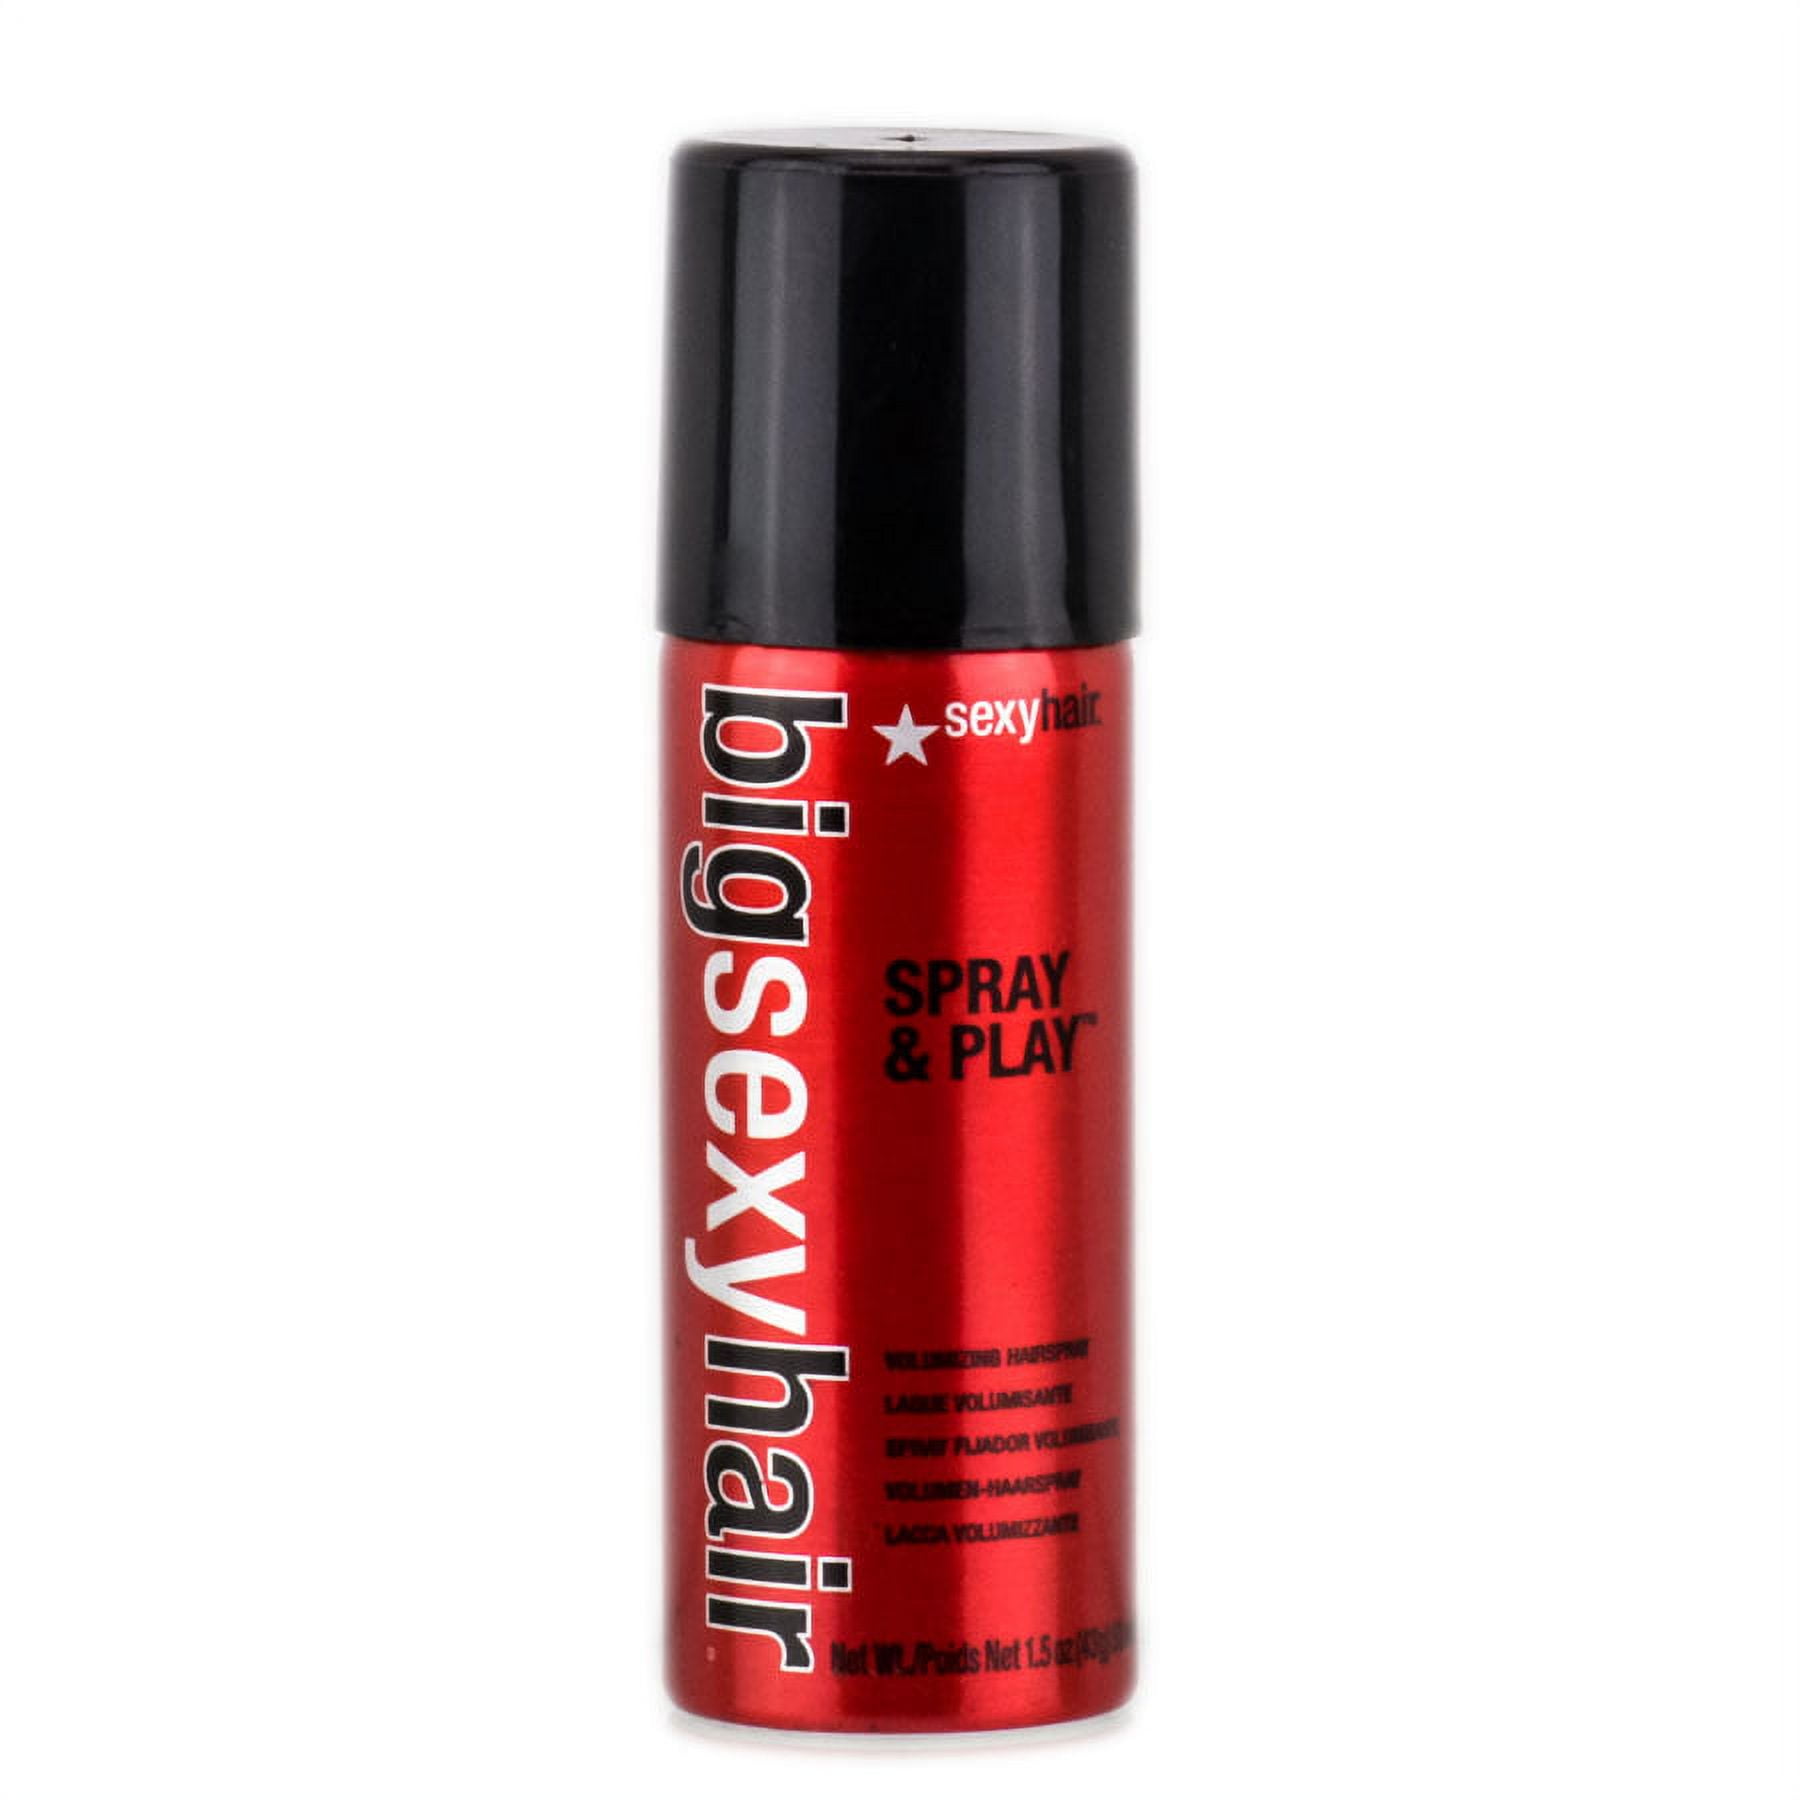 Big Sexy Hair Spray and Play Volumizing Hairspray - 1.5 oz / Travel Size - Pack of 2 with Sleek Comb